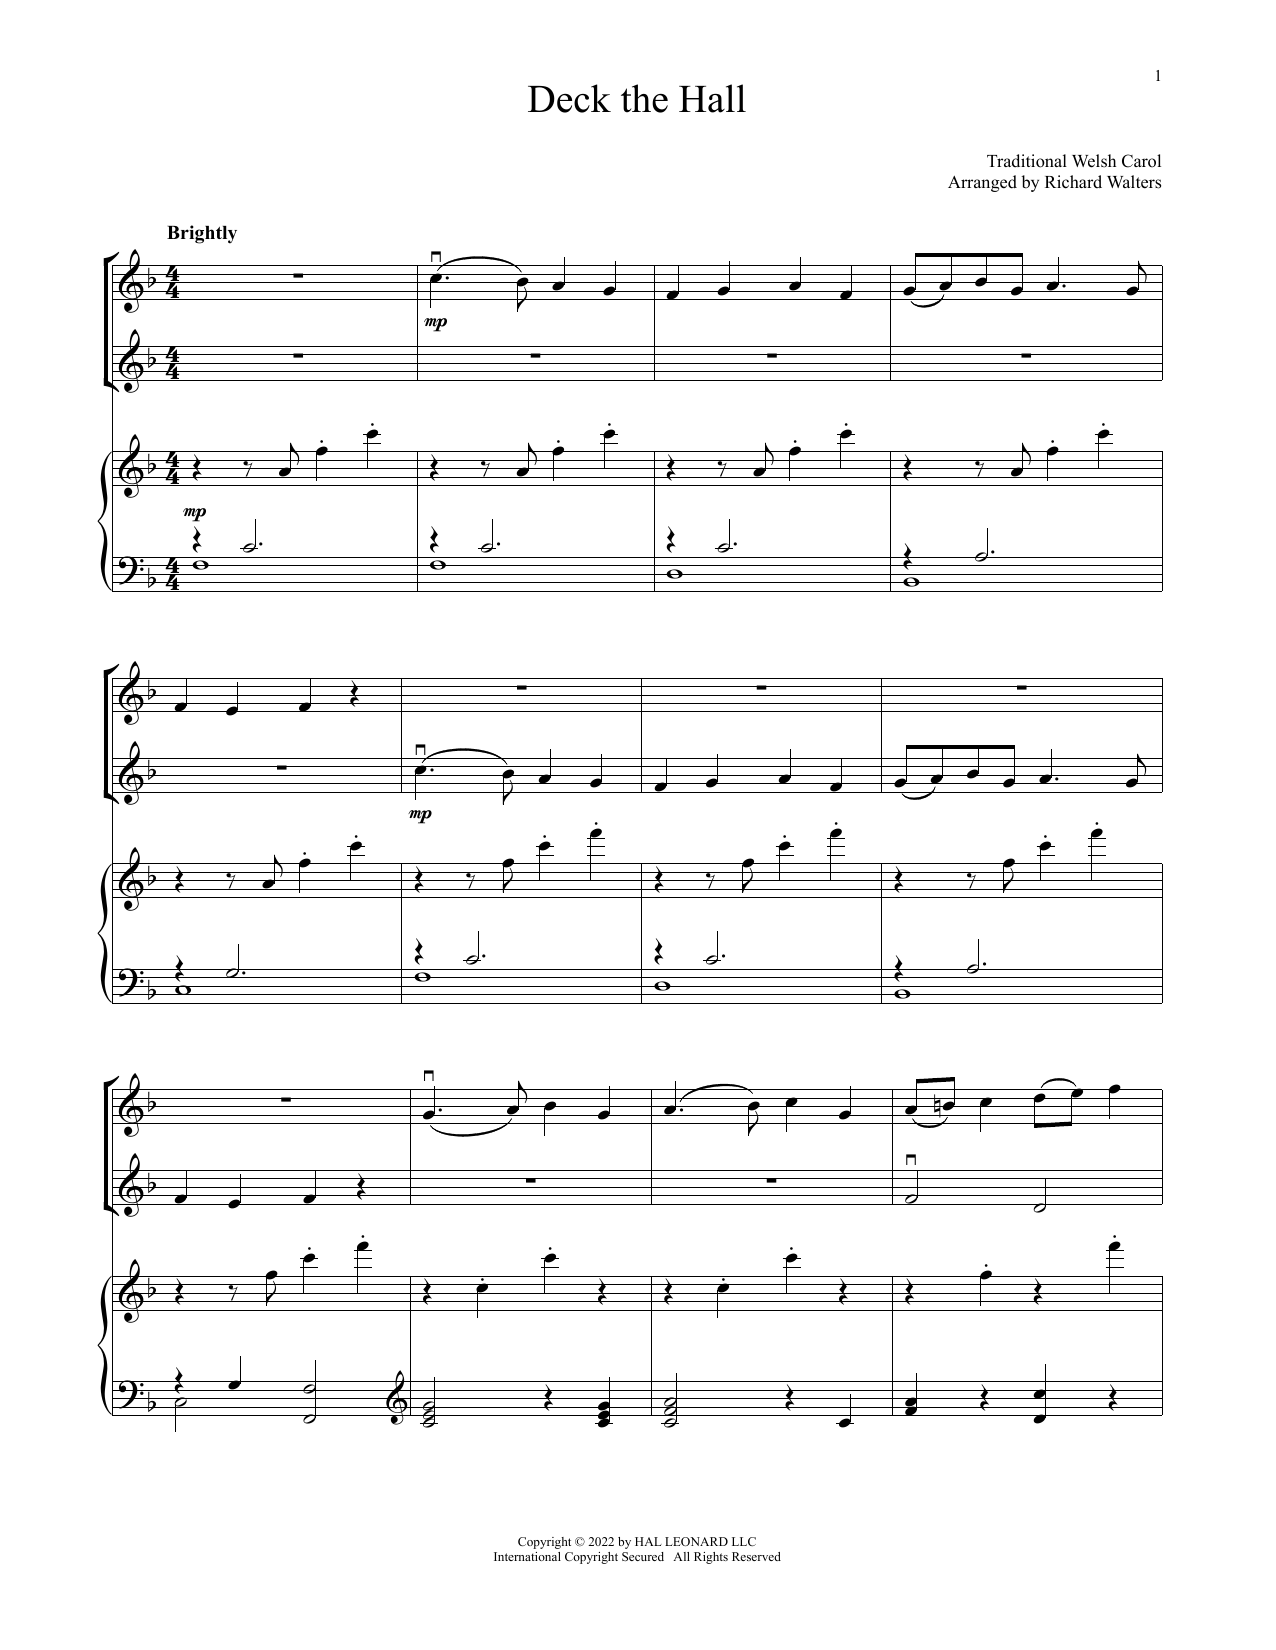 Download Traditional Welsh Carol Deck The Hall (for Violin Duet and Pian Sheet Music